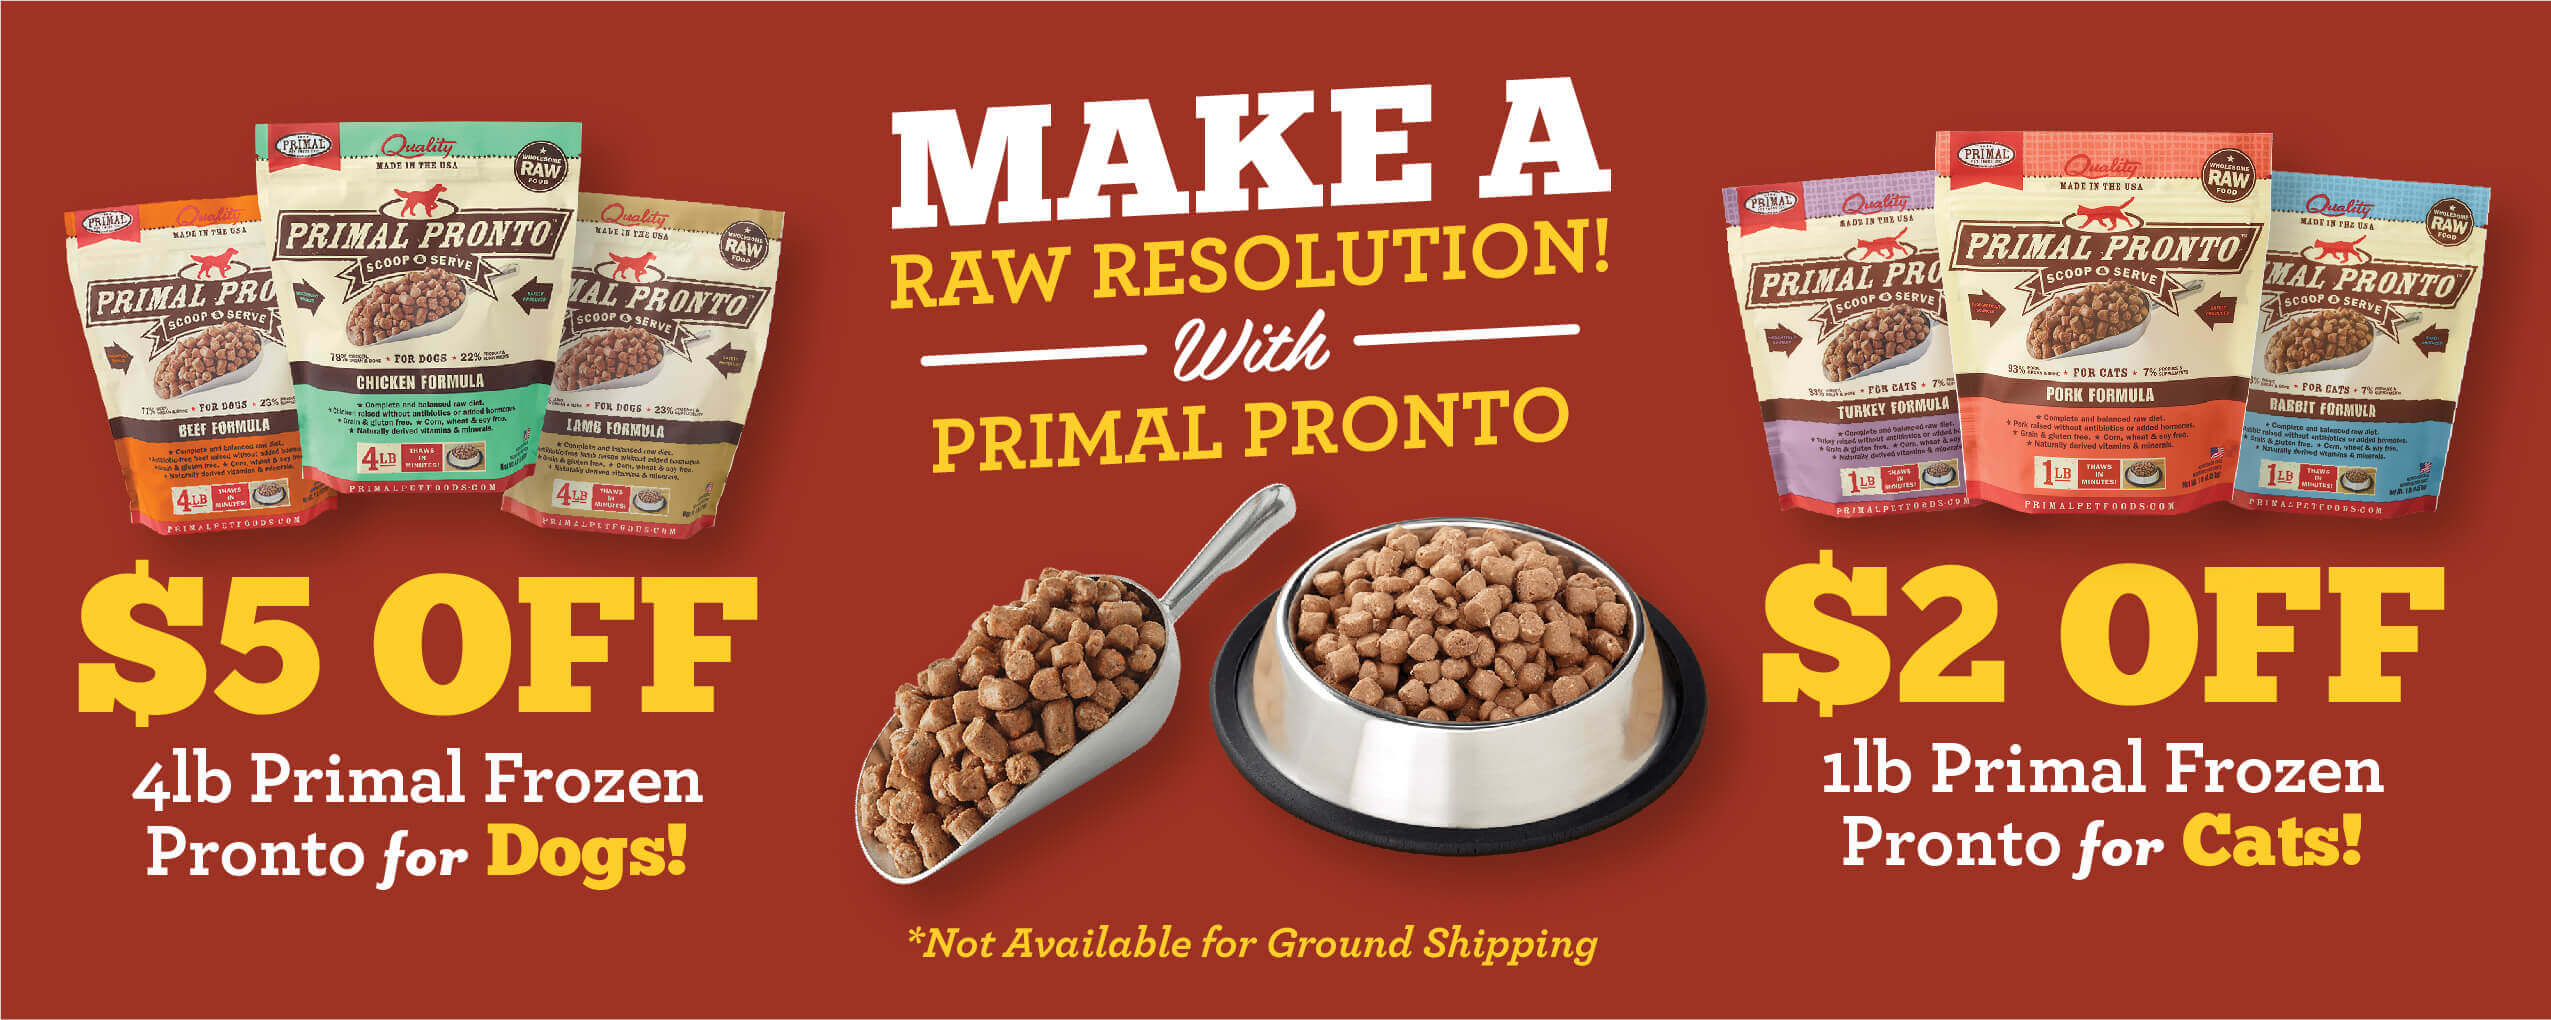 January Specials - Make a Raw Resolution with Primal Pronto